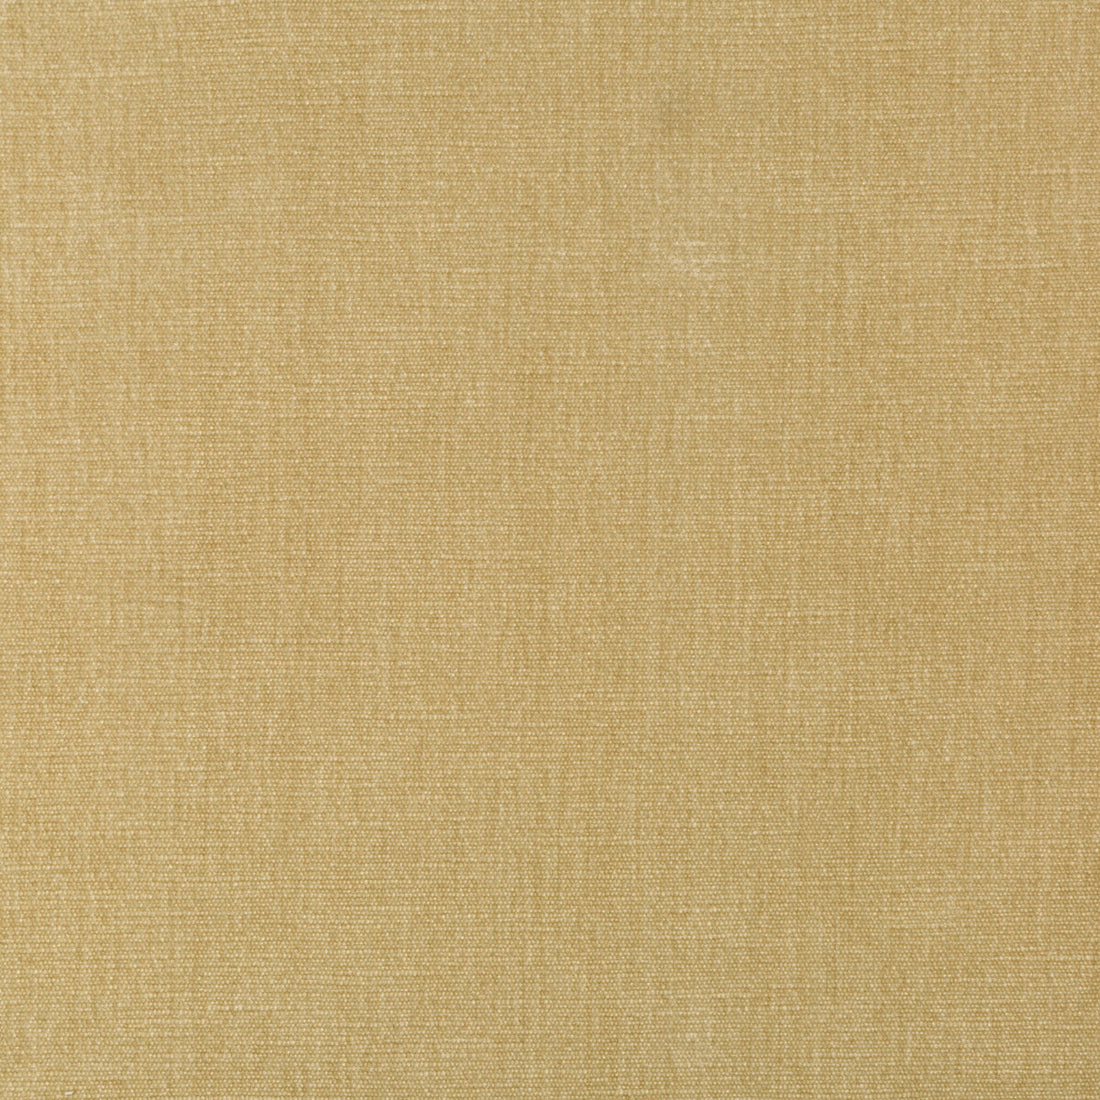 Kravet Smart fabric in 36076-161 color - pattern 36076.161.0 - by Kravet Smart in the Sumptuous Chenille II collection